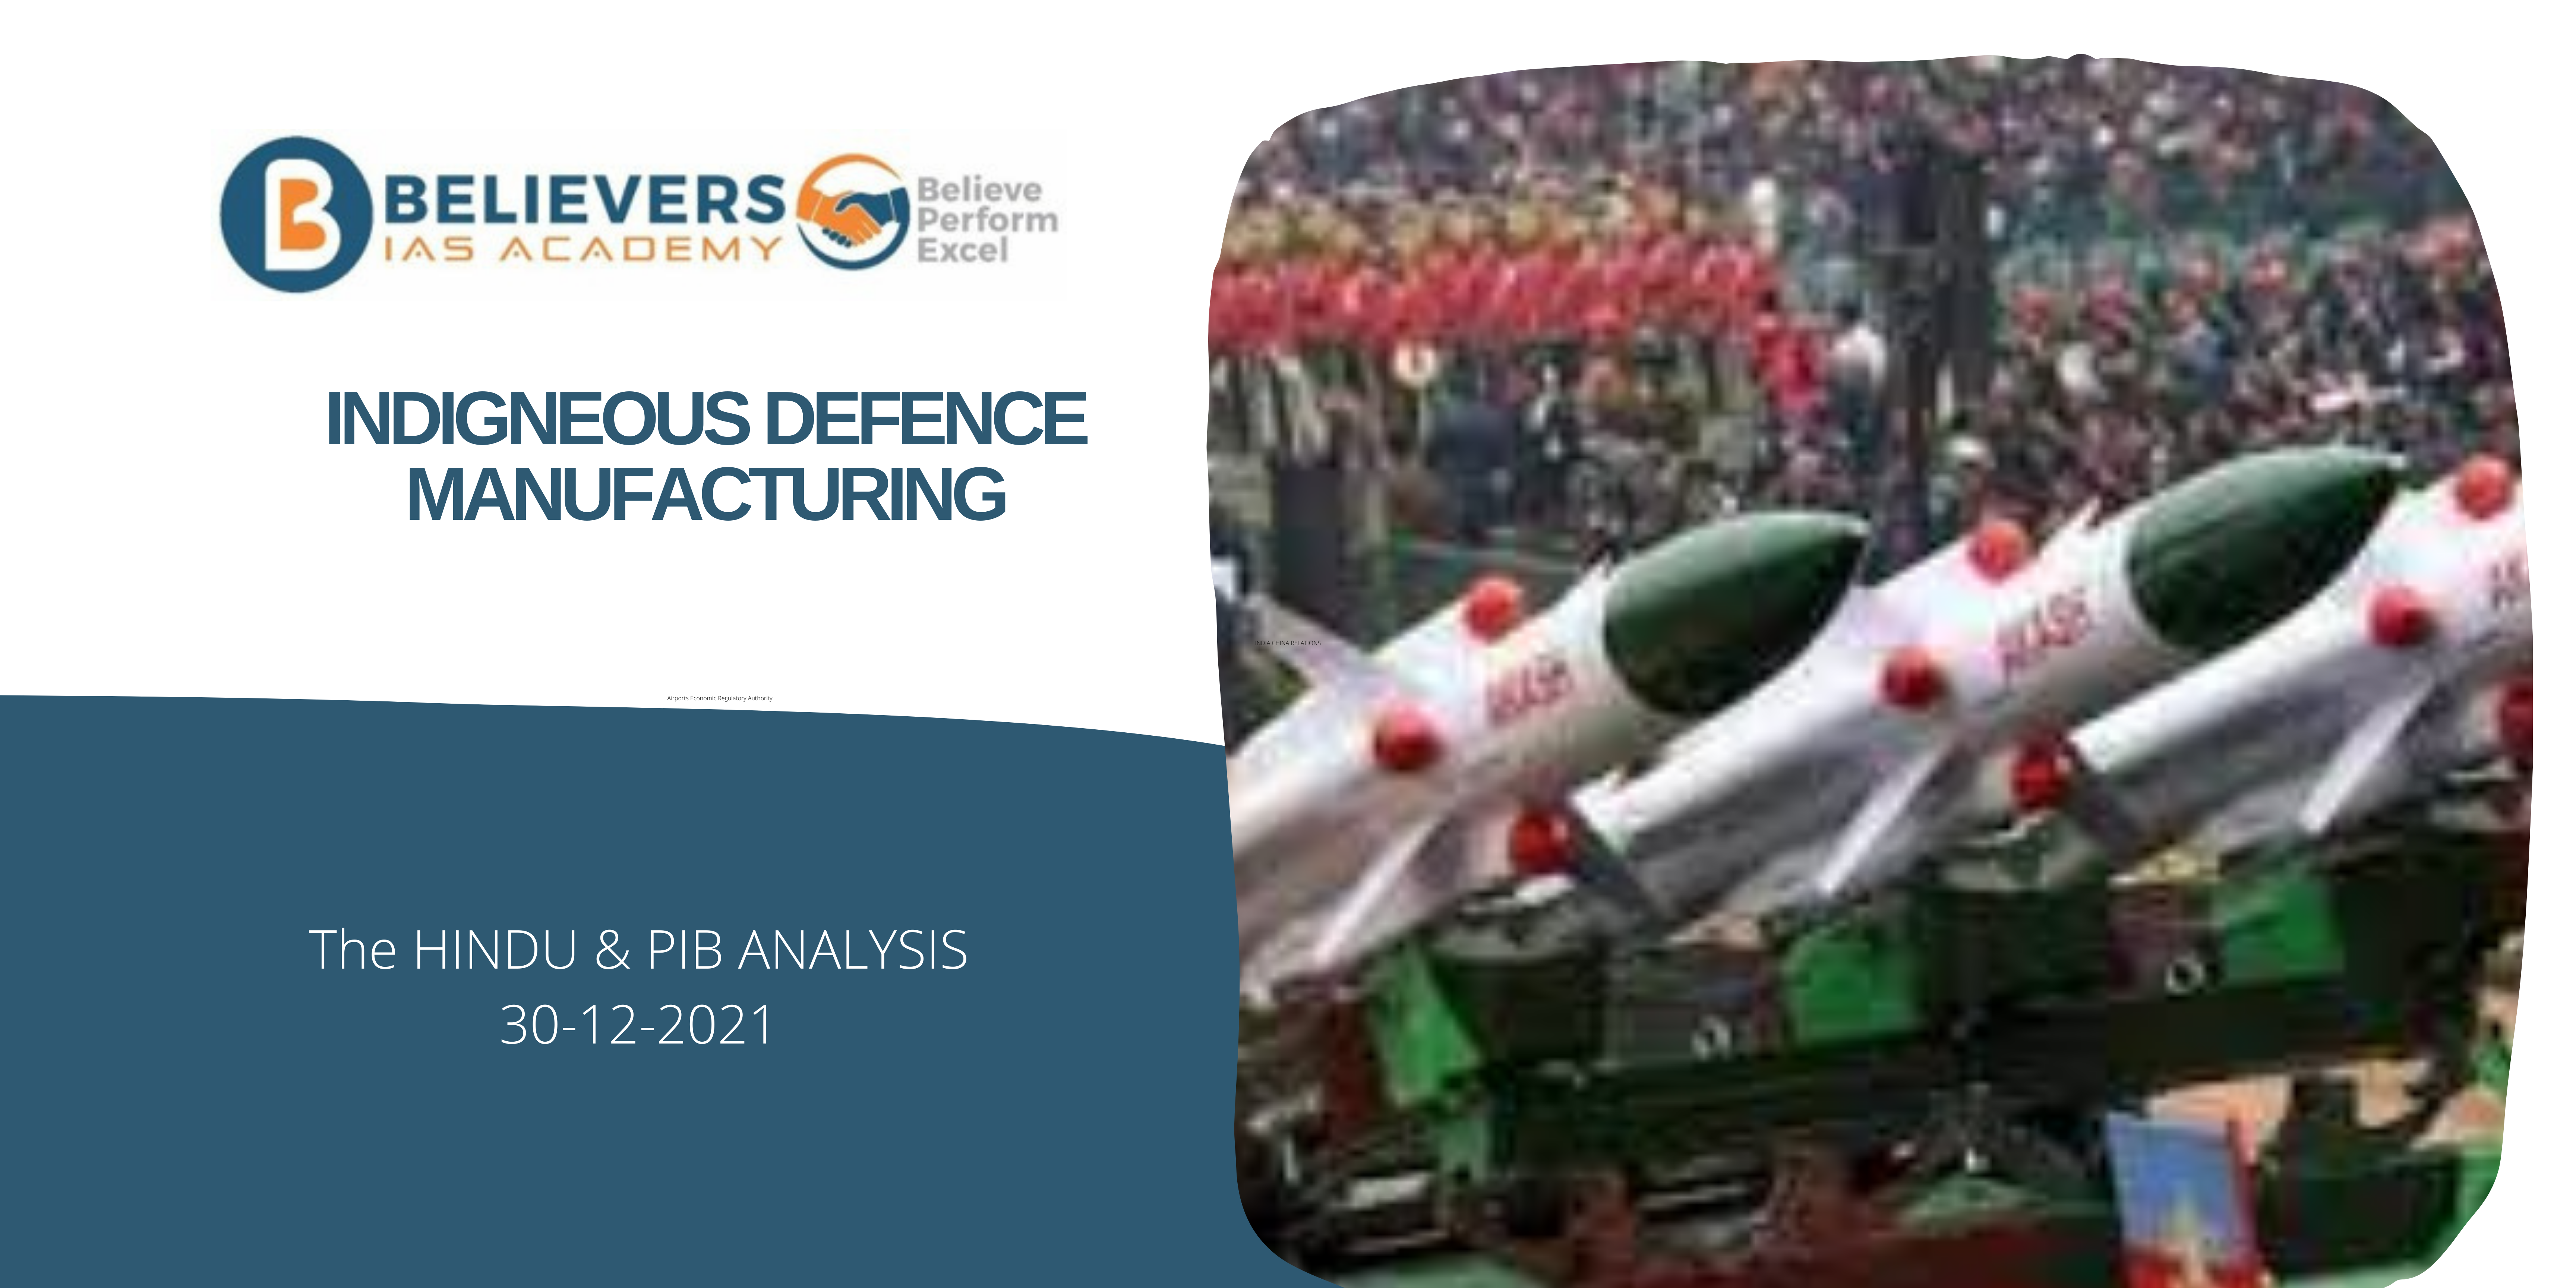 IAS Current affairs - INDIGNEOUS DEFENCE MANUFACTURING